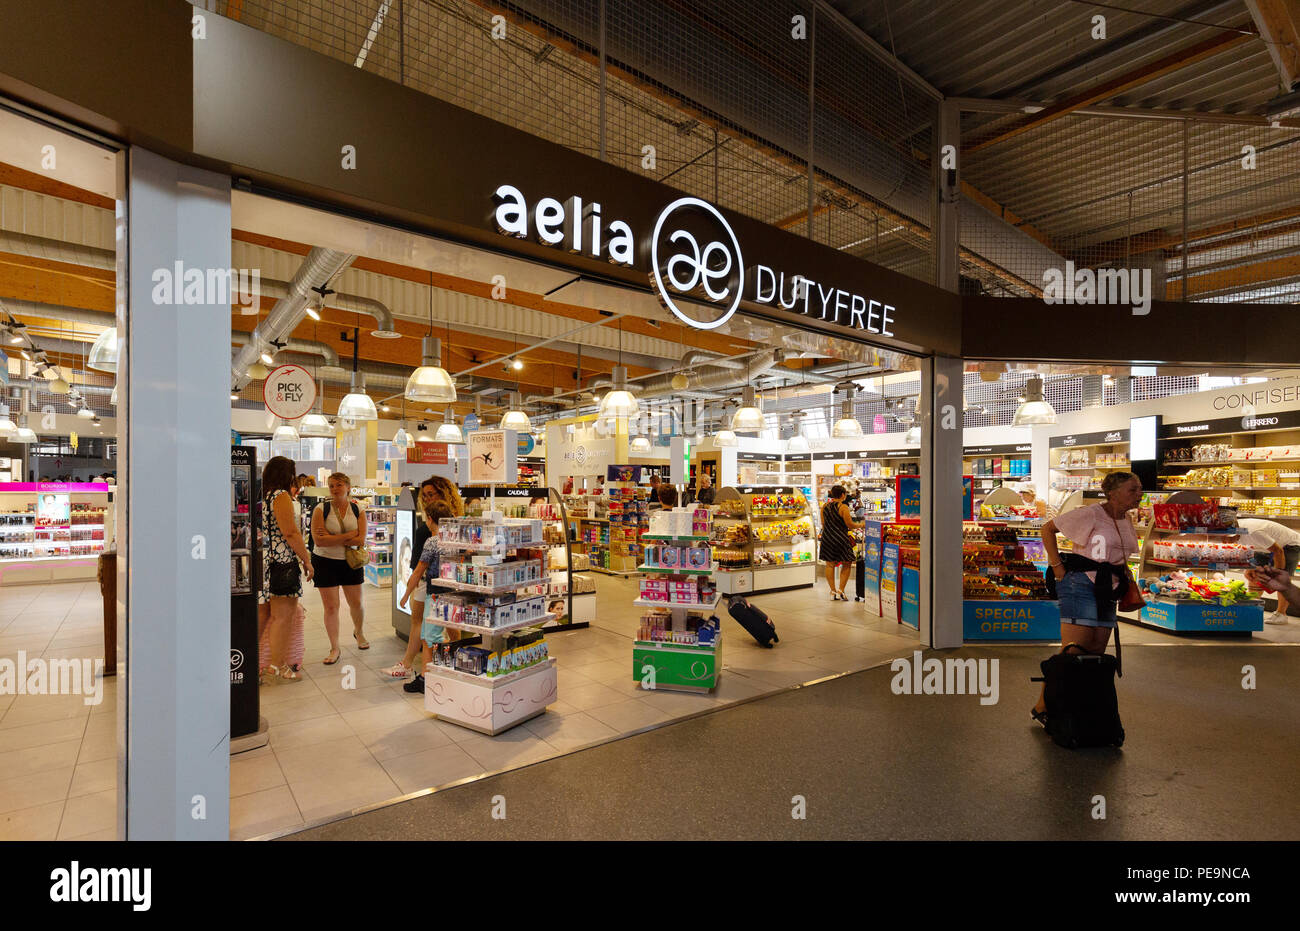 Roissy, France - August 14 2018 : Duty Free Store In The Paris Charles De  Gaulle Airport Stock Photo, Picture and Royalty Free Image. Image 121016365.